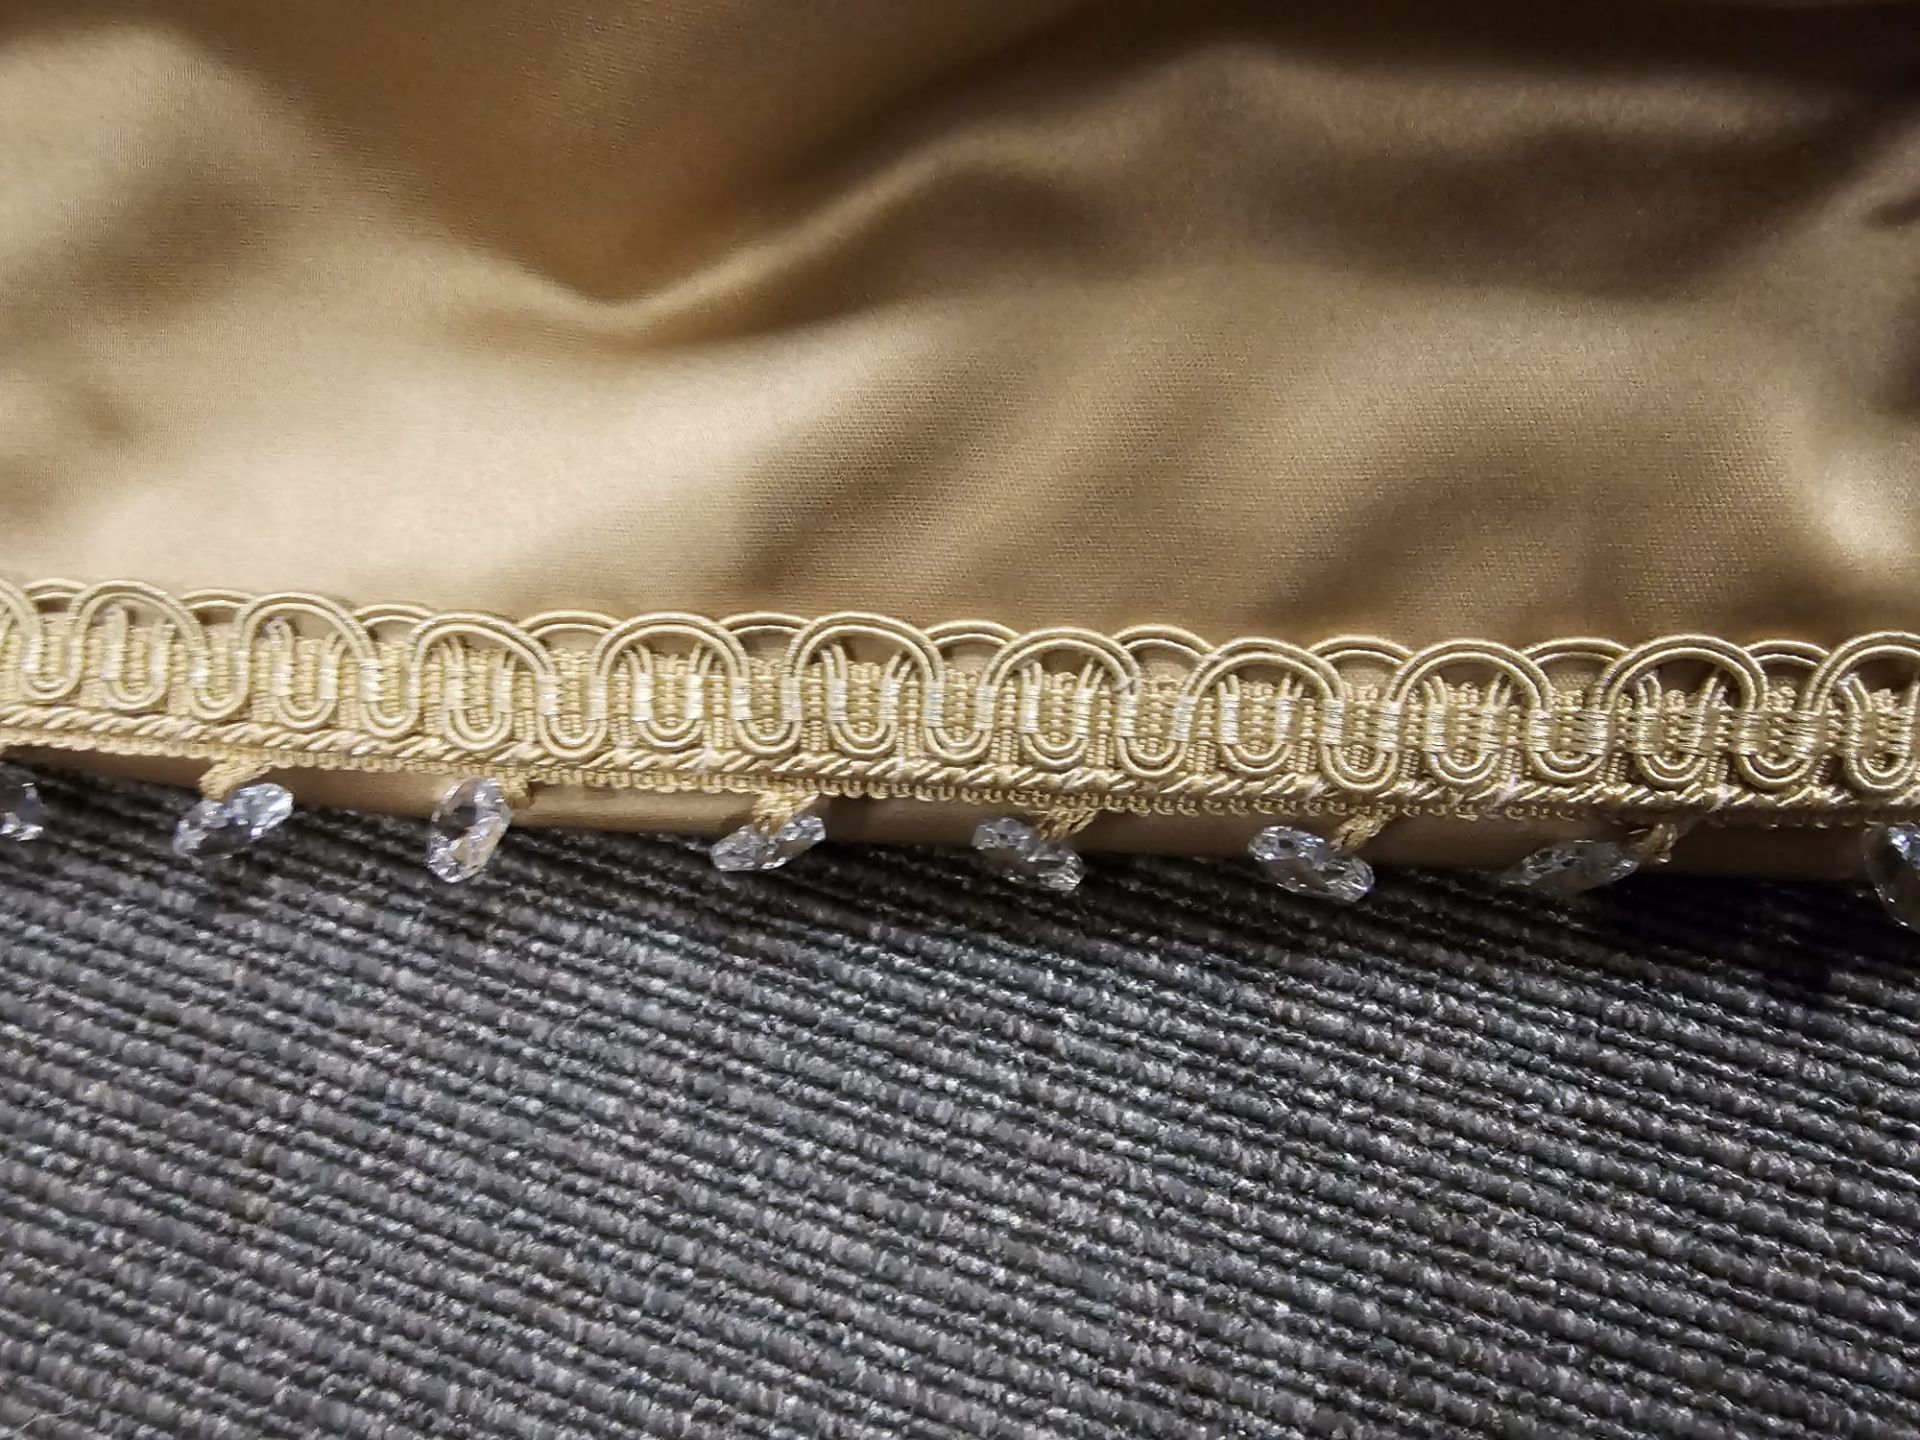 A pair of silk drapes and jabots gold with crystal trim edging and embroidered in gold silver - Image 3 of 3